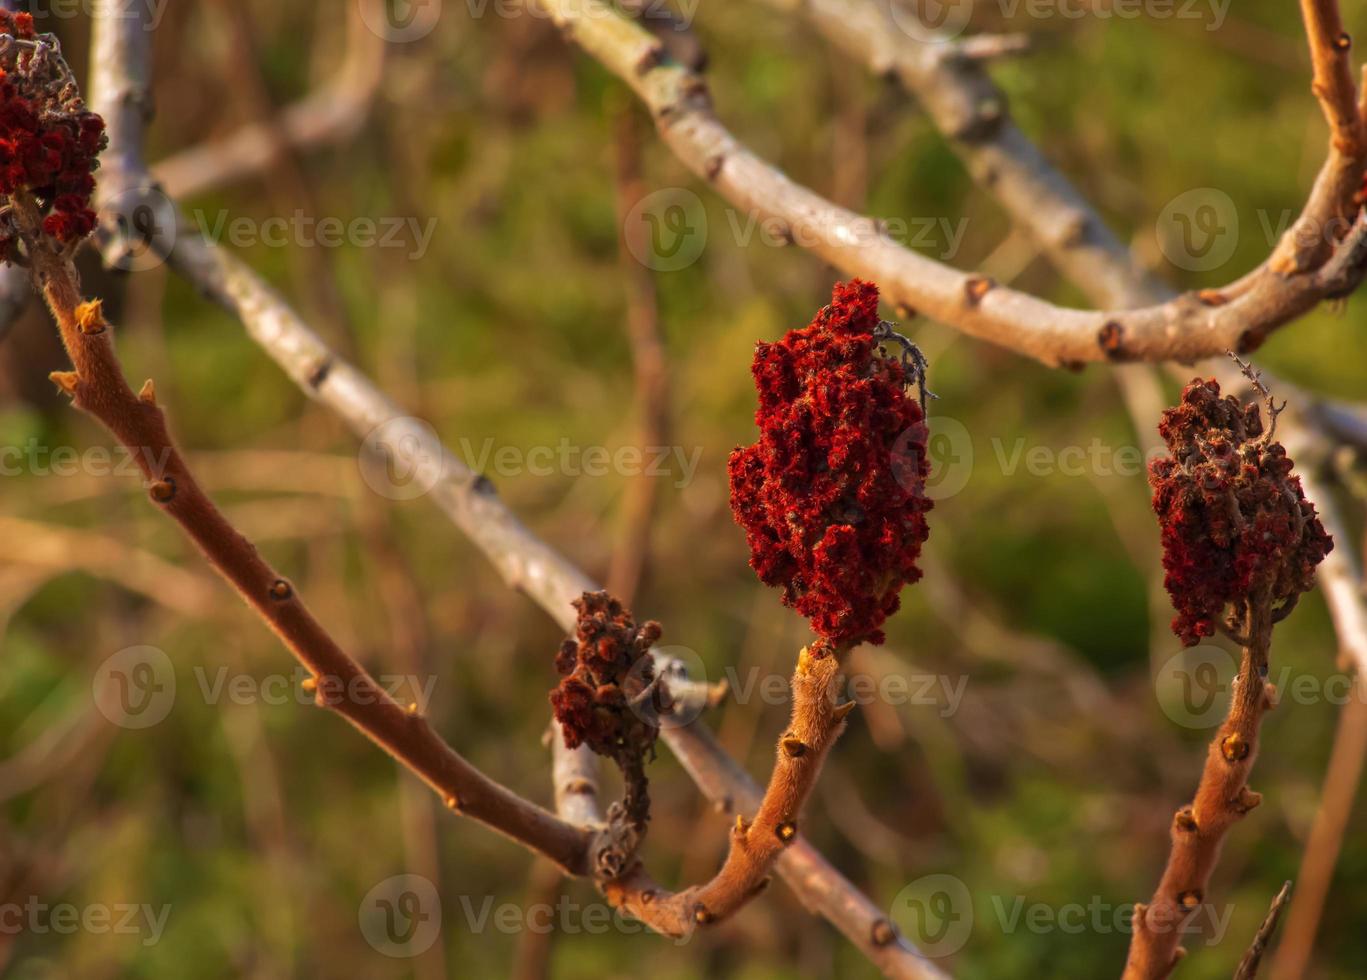 Sumac with deer antlers in early spring. Large branches of Rhus typhina L with last year's bright red fruits. photo